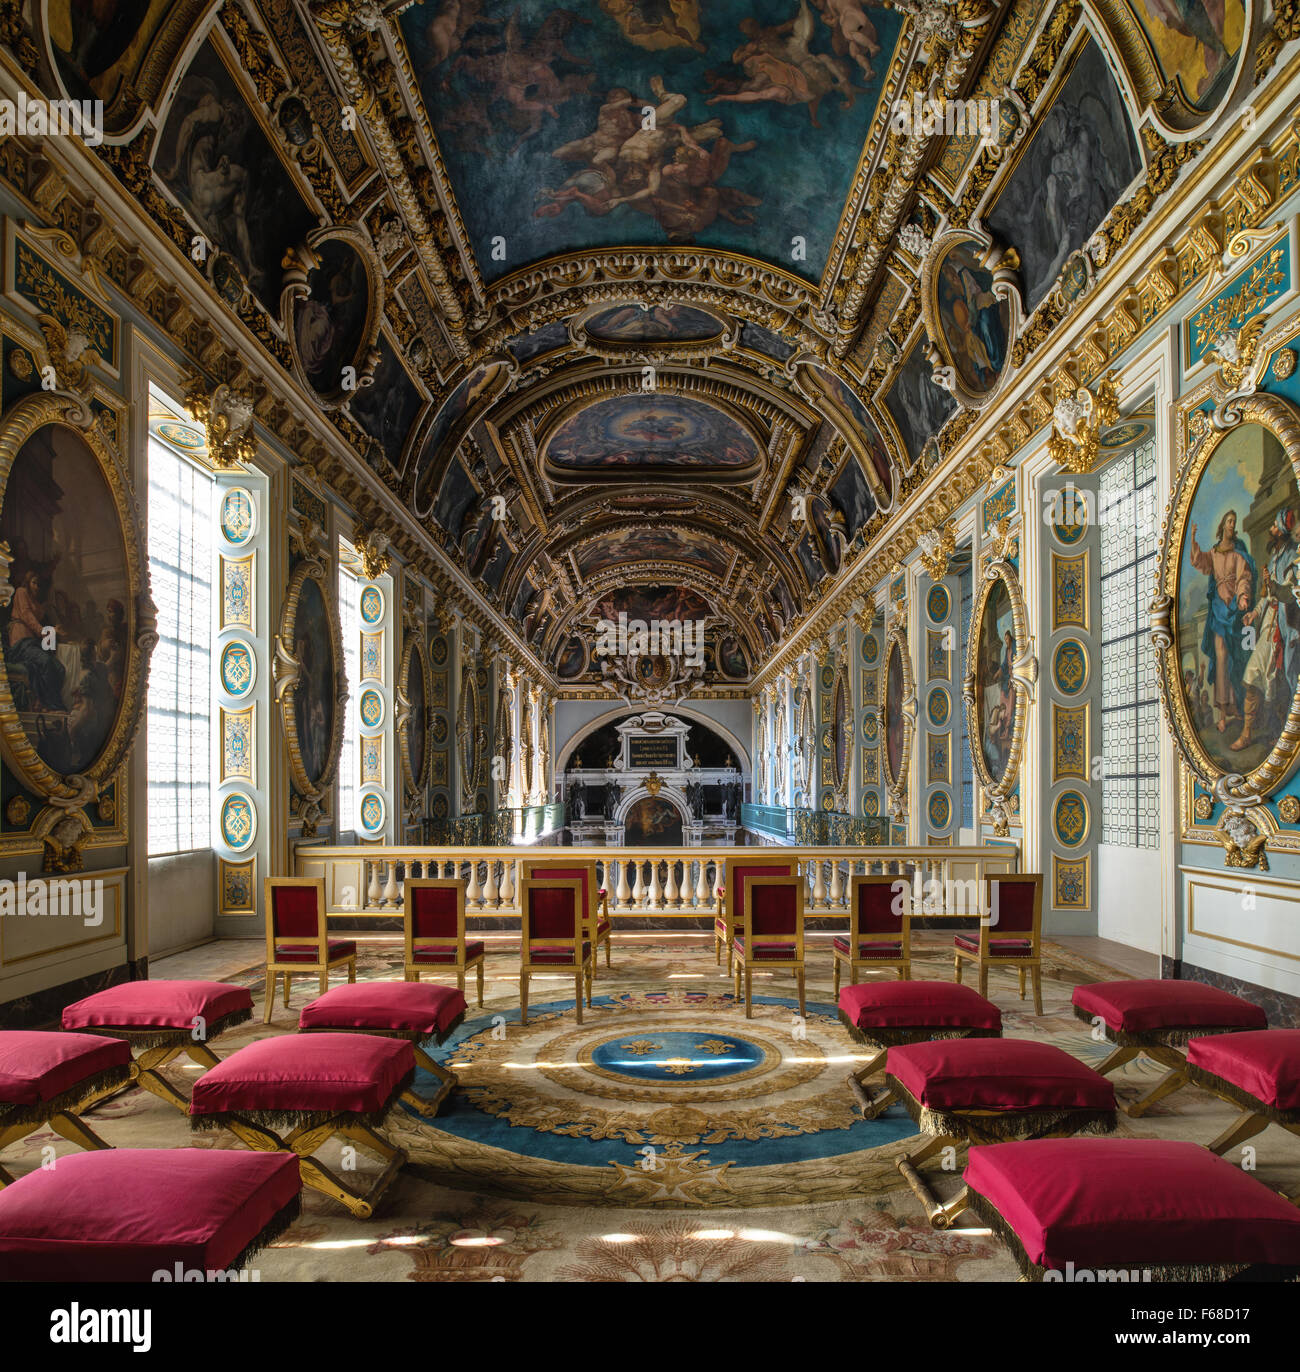 Fontainebleau, France - 16 August 2015 : Interior view of the Fontainebleau Palace ( Chateau de Fontainebleau ). Stock Photo